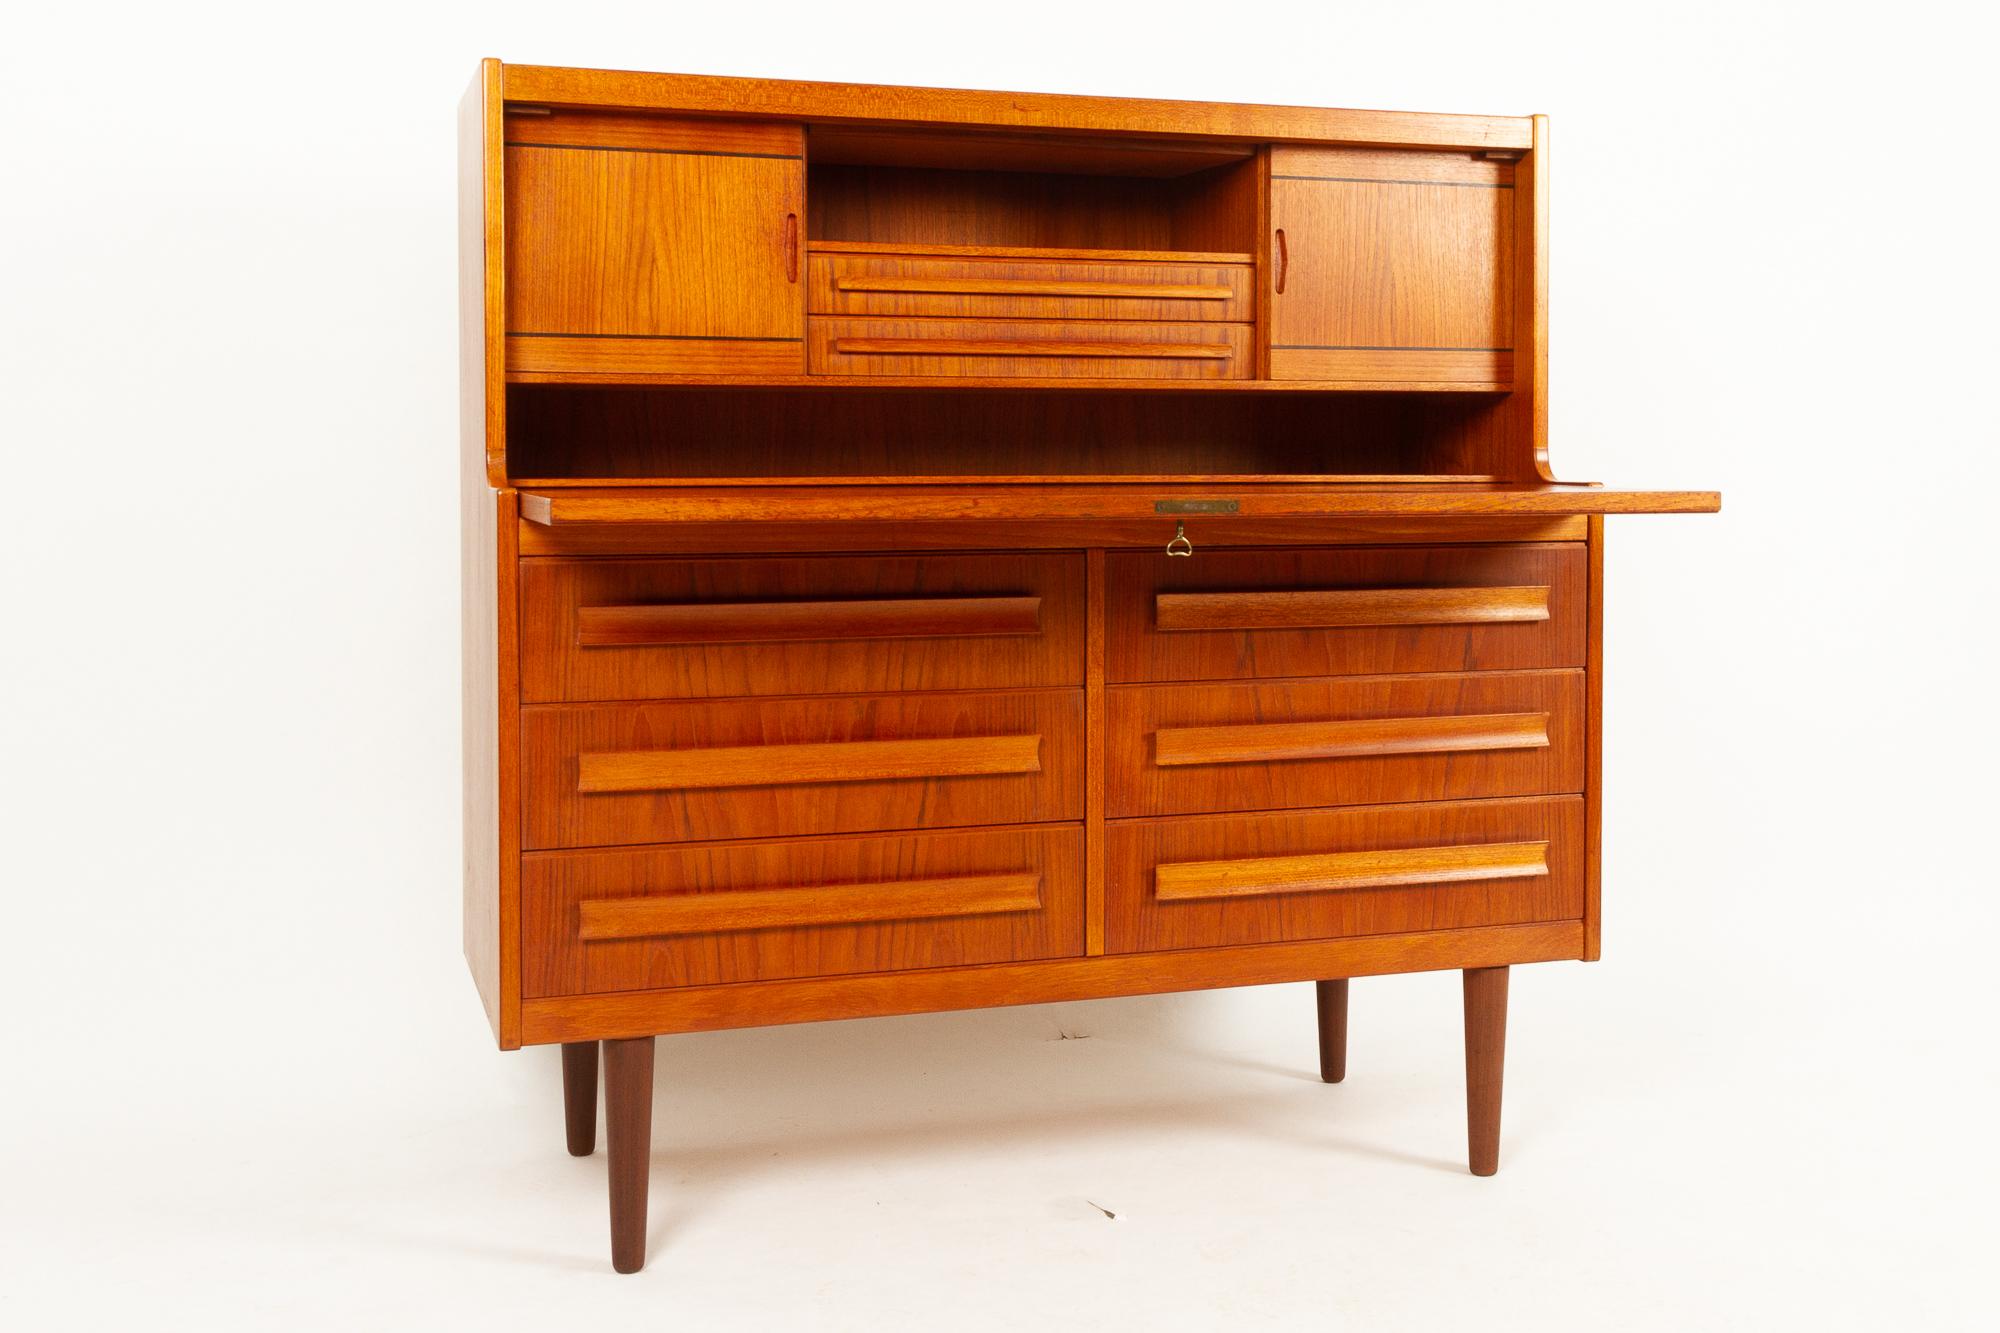 Danish teak secretaire with hidden compartment by Sigfred Omann for Ølholm Møbelfabrik 1960s.
Very stylish Mid-Century Modern teak secretary with drawers, cabinets and flip down tabletop. 
Rarely seen model, very fine craftsmanship and high